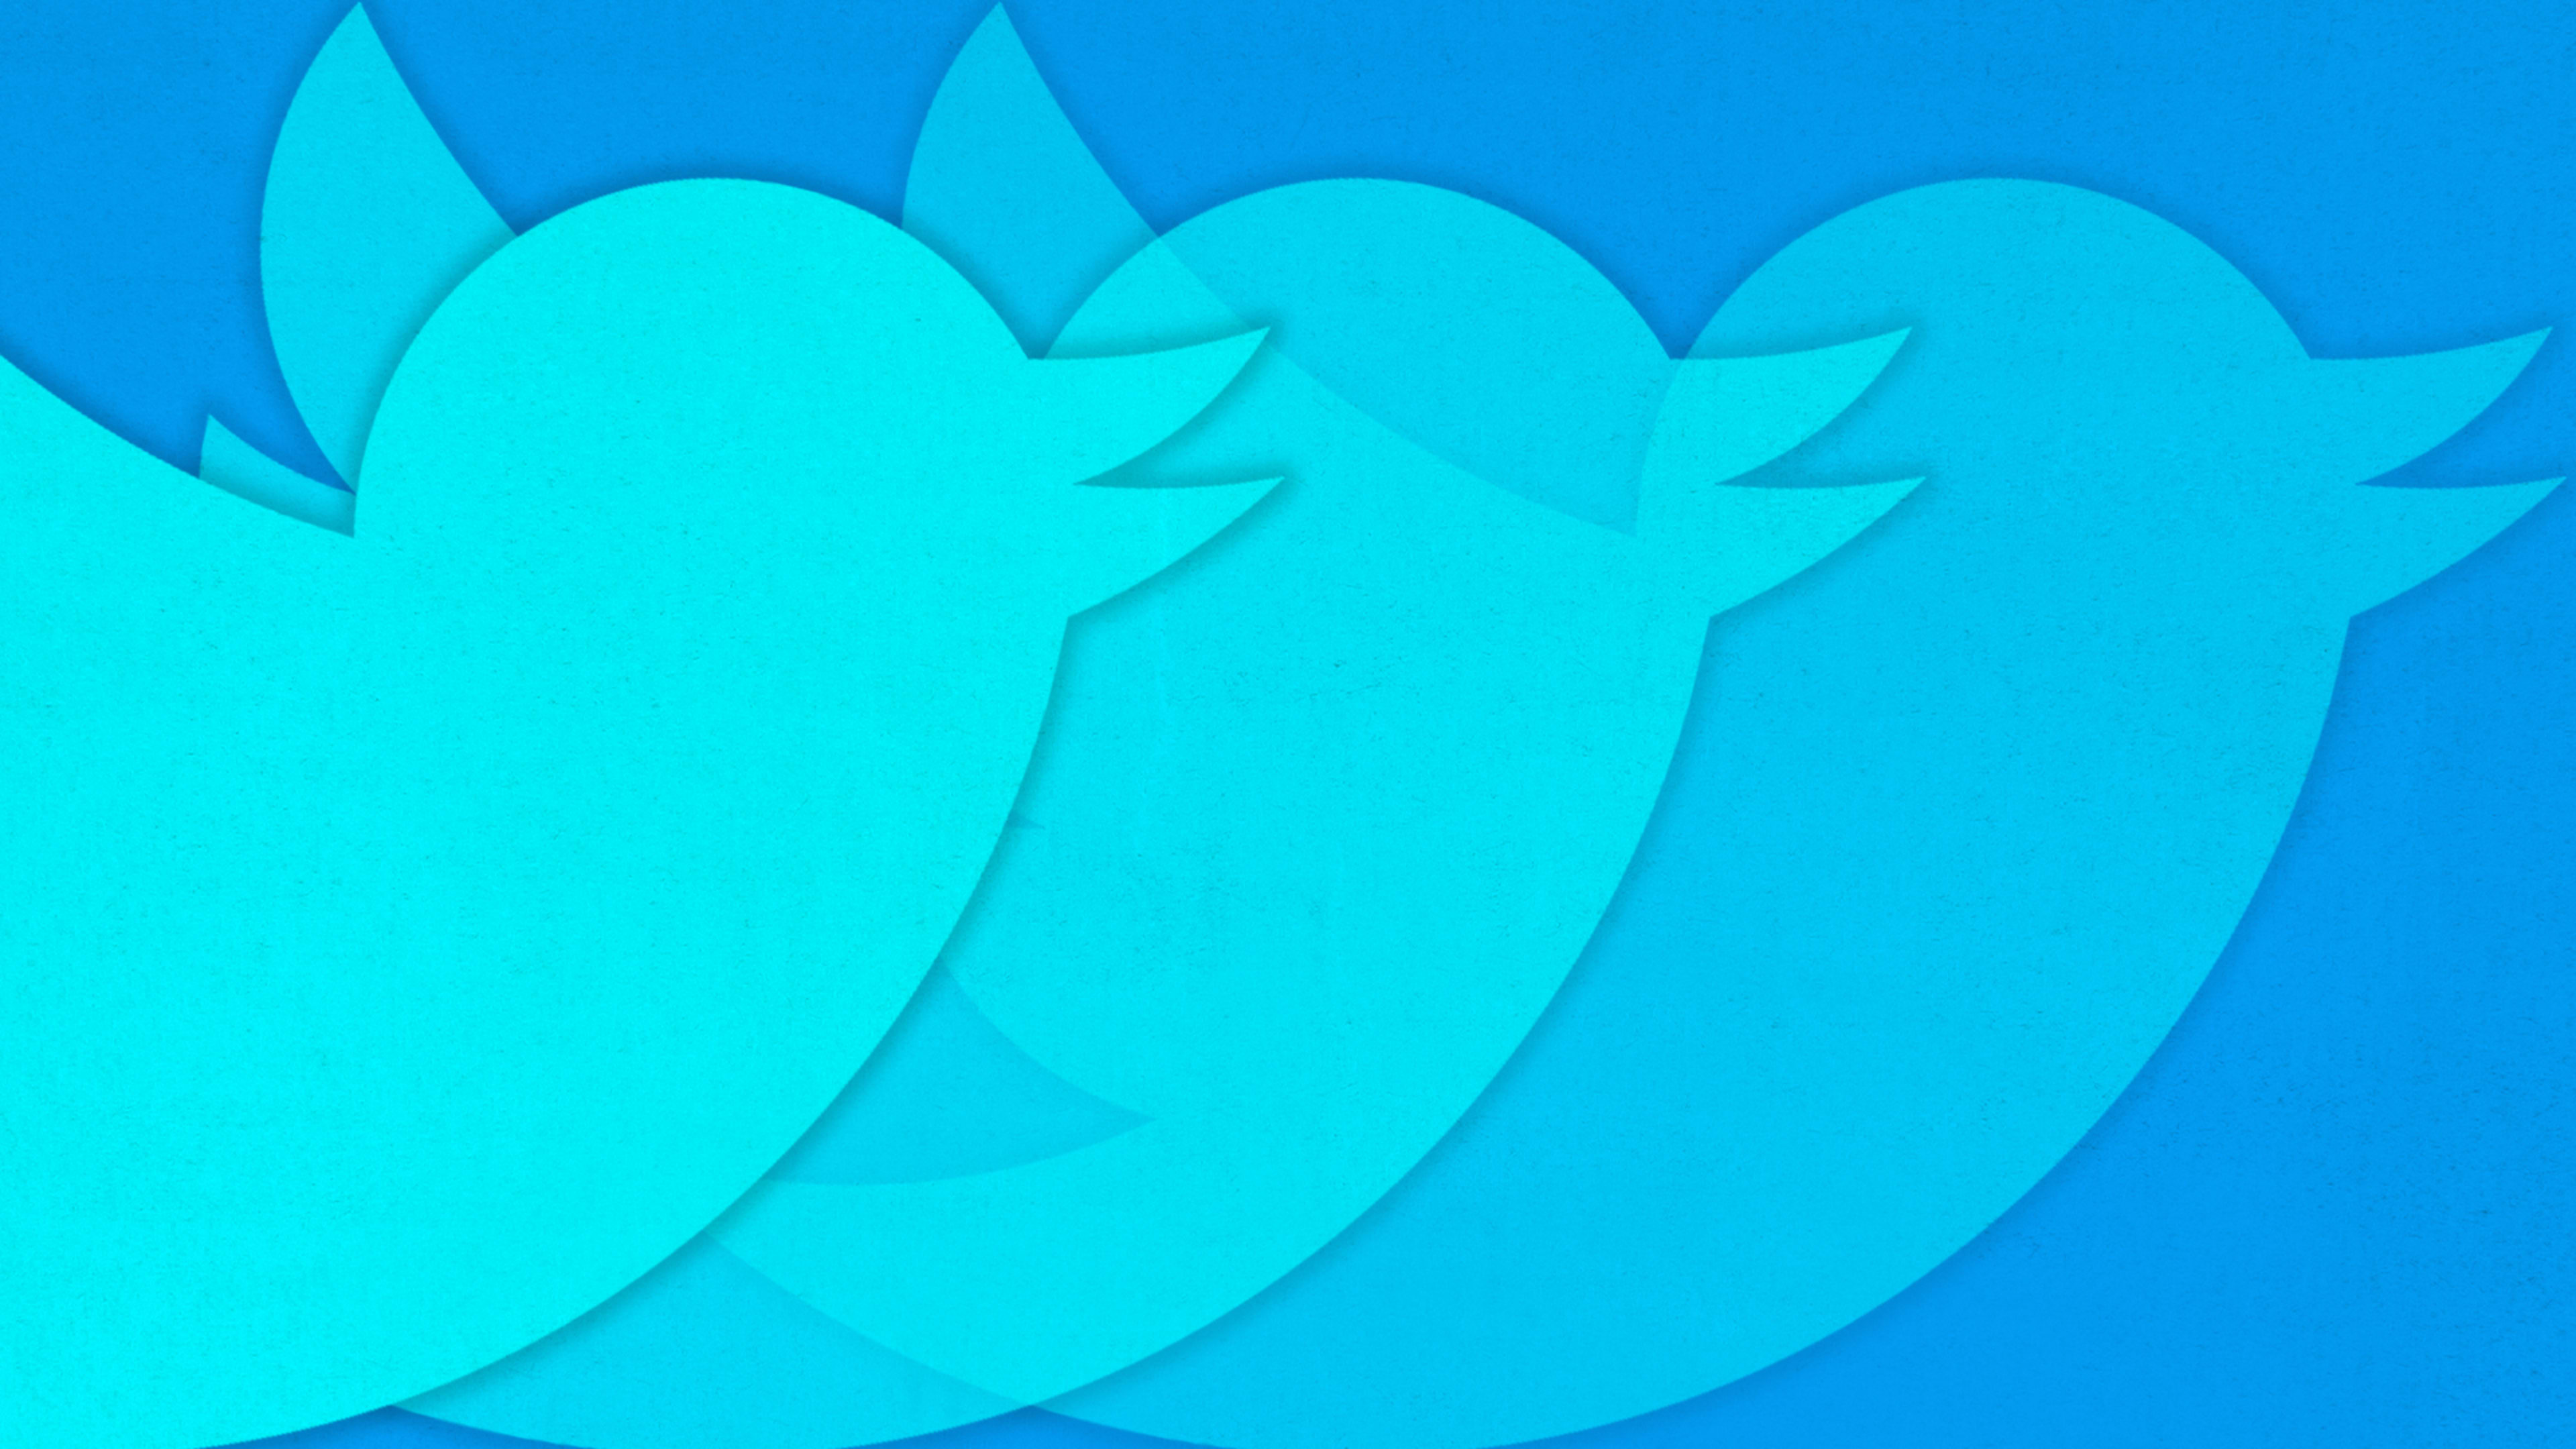 Here’s how to ‘fleet’ with Twitter’s new disappearing tweet feature